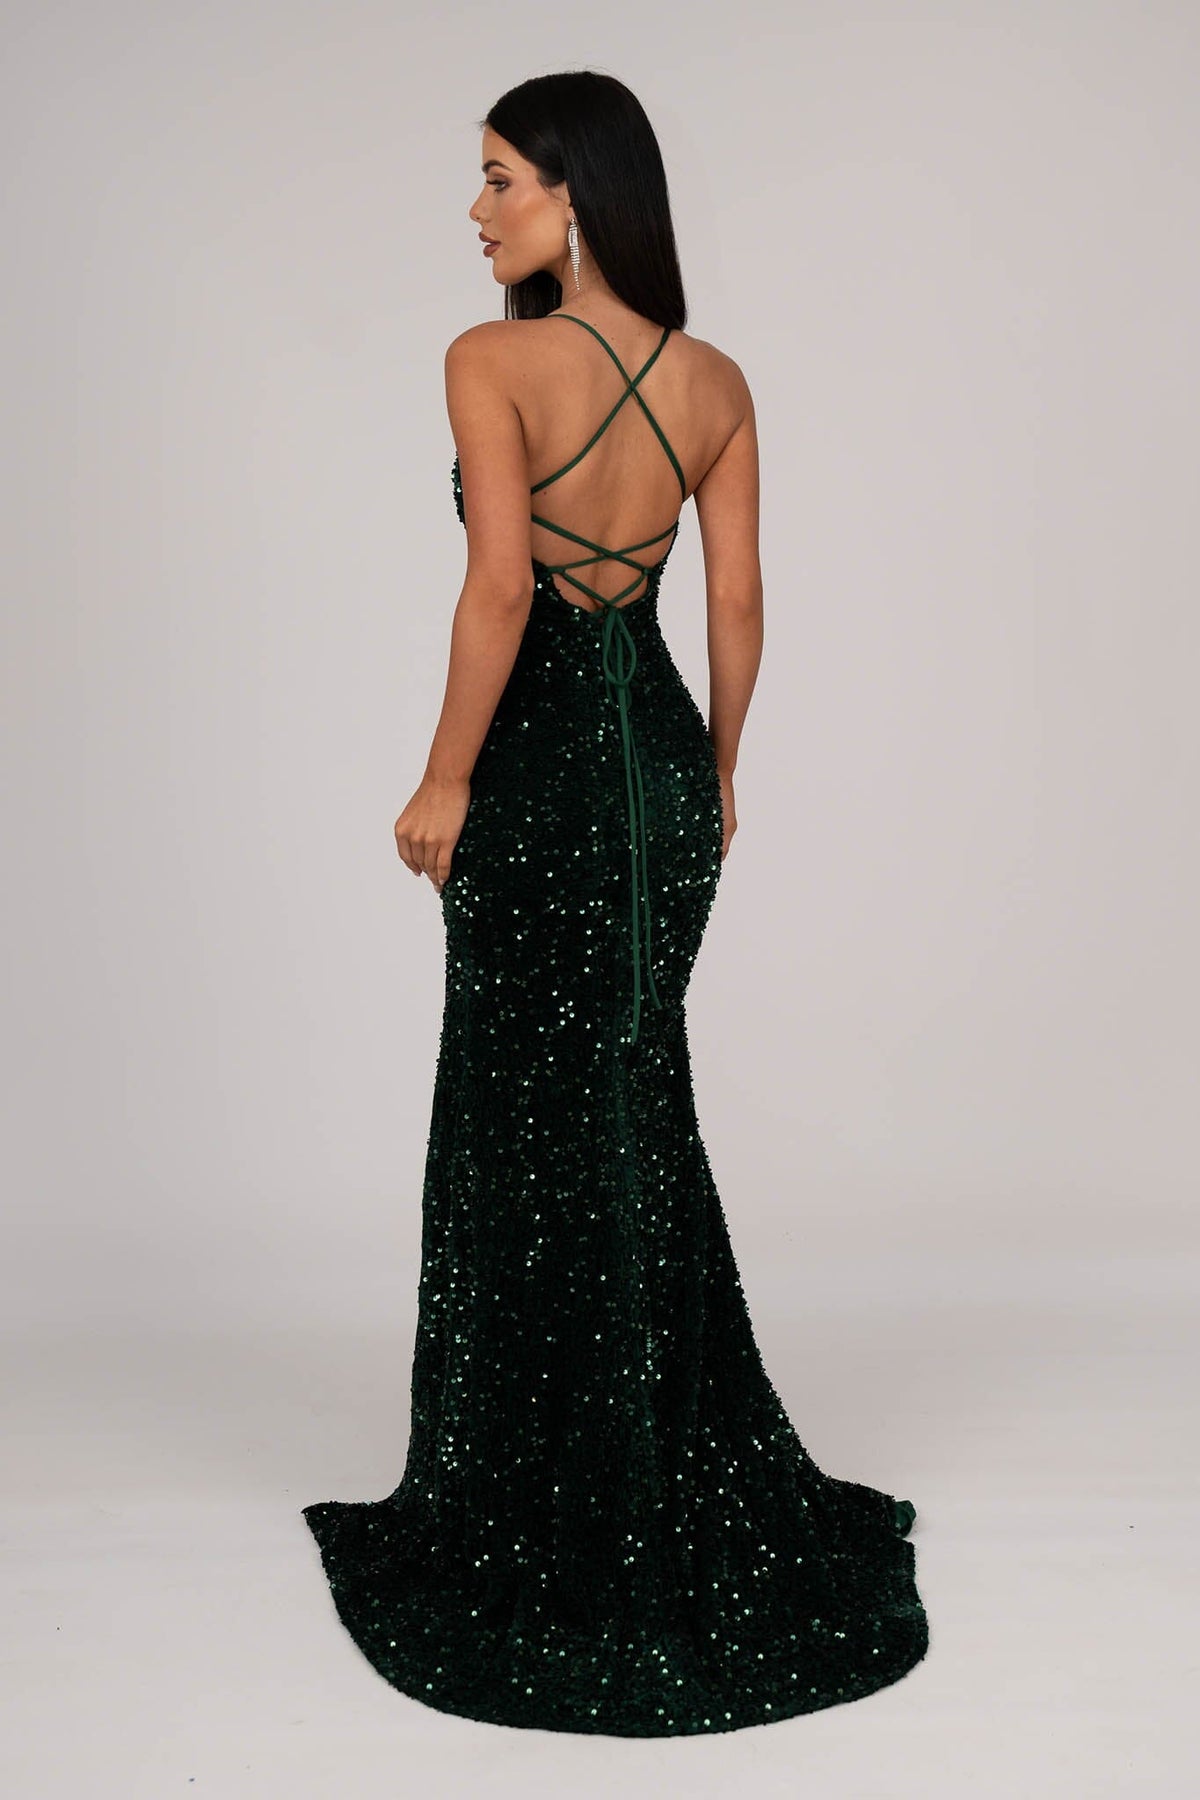 Lace Up Open Back of Emerald Green Velvet Sequin Full Length Evening Gown with V Neckline, Thin Shoulder Straps and Thigh High Side Split